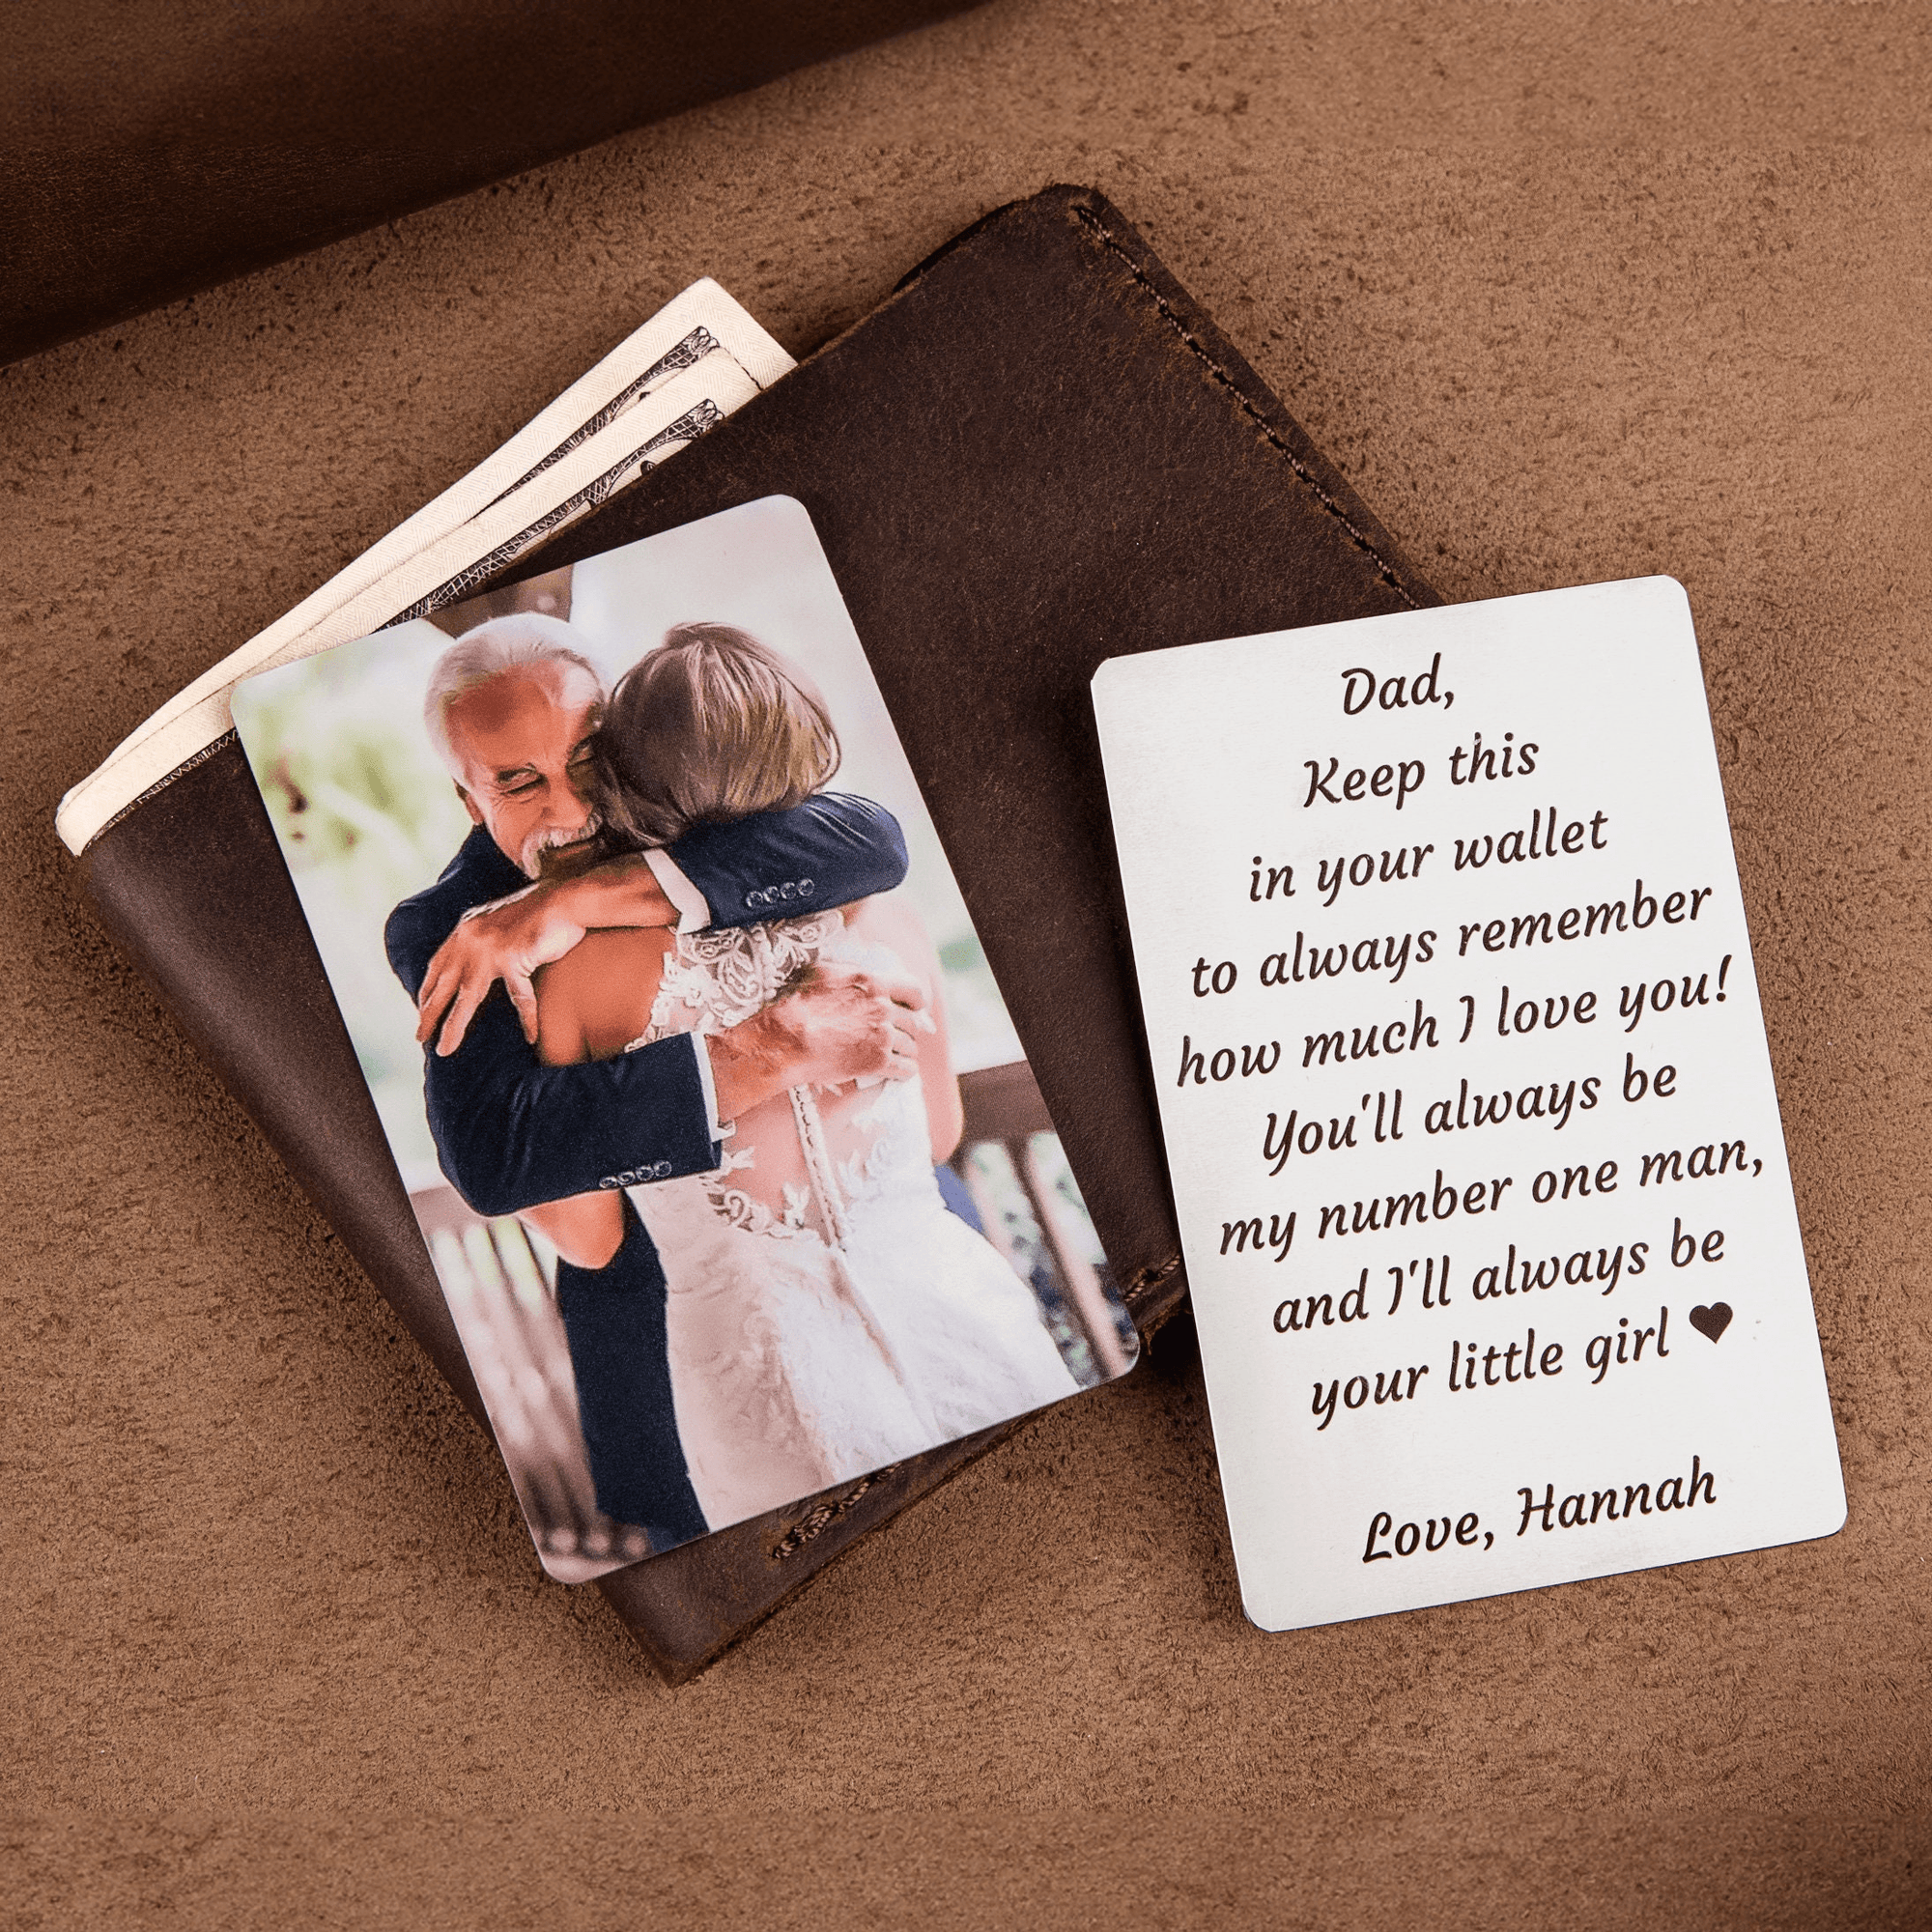 Custom Photo Wallet Insert Card - Personalized Double-sided Aluminum Wallet Card - Father's Day Gift for Family Members Grandma, Grandpa, Dad, Mom, Boyfriend, Girlfriend, Husband, Wife - Suzitee Store